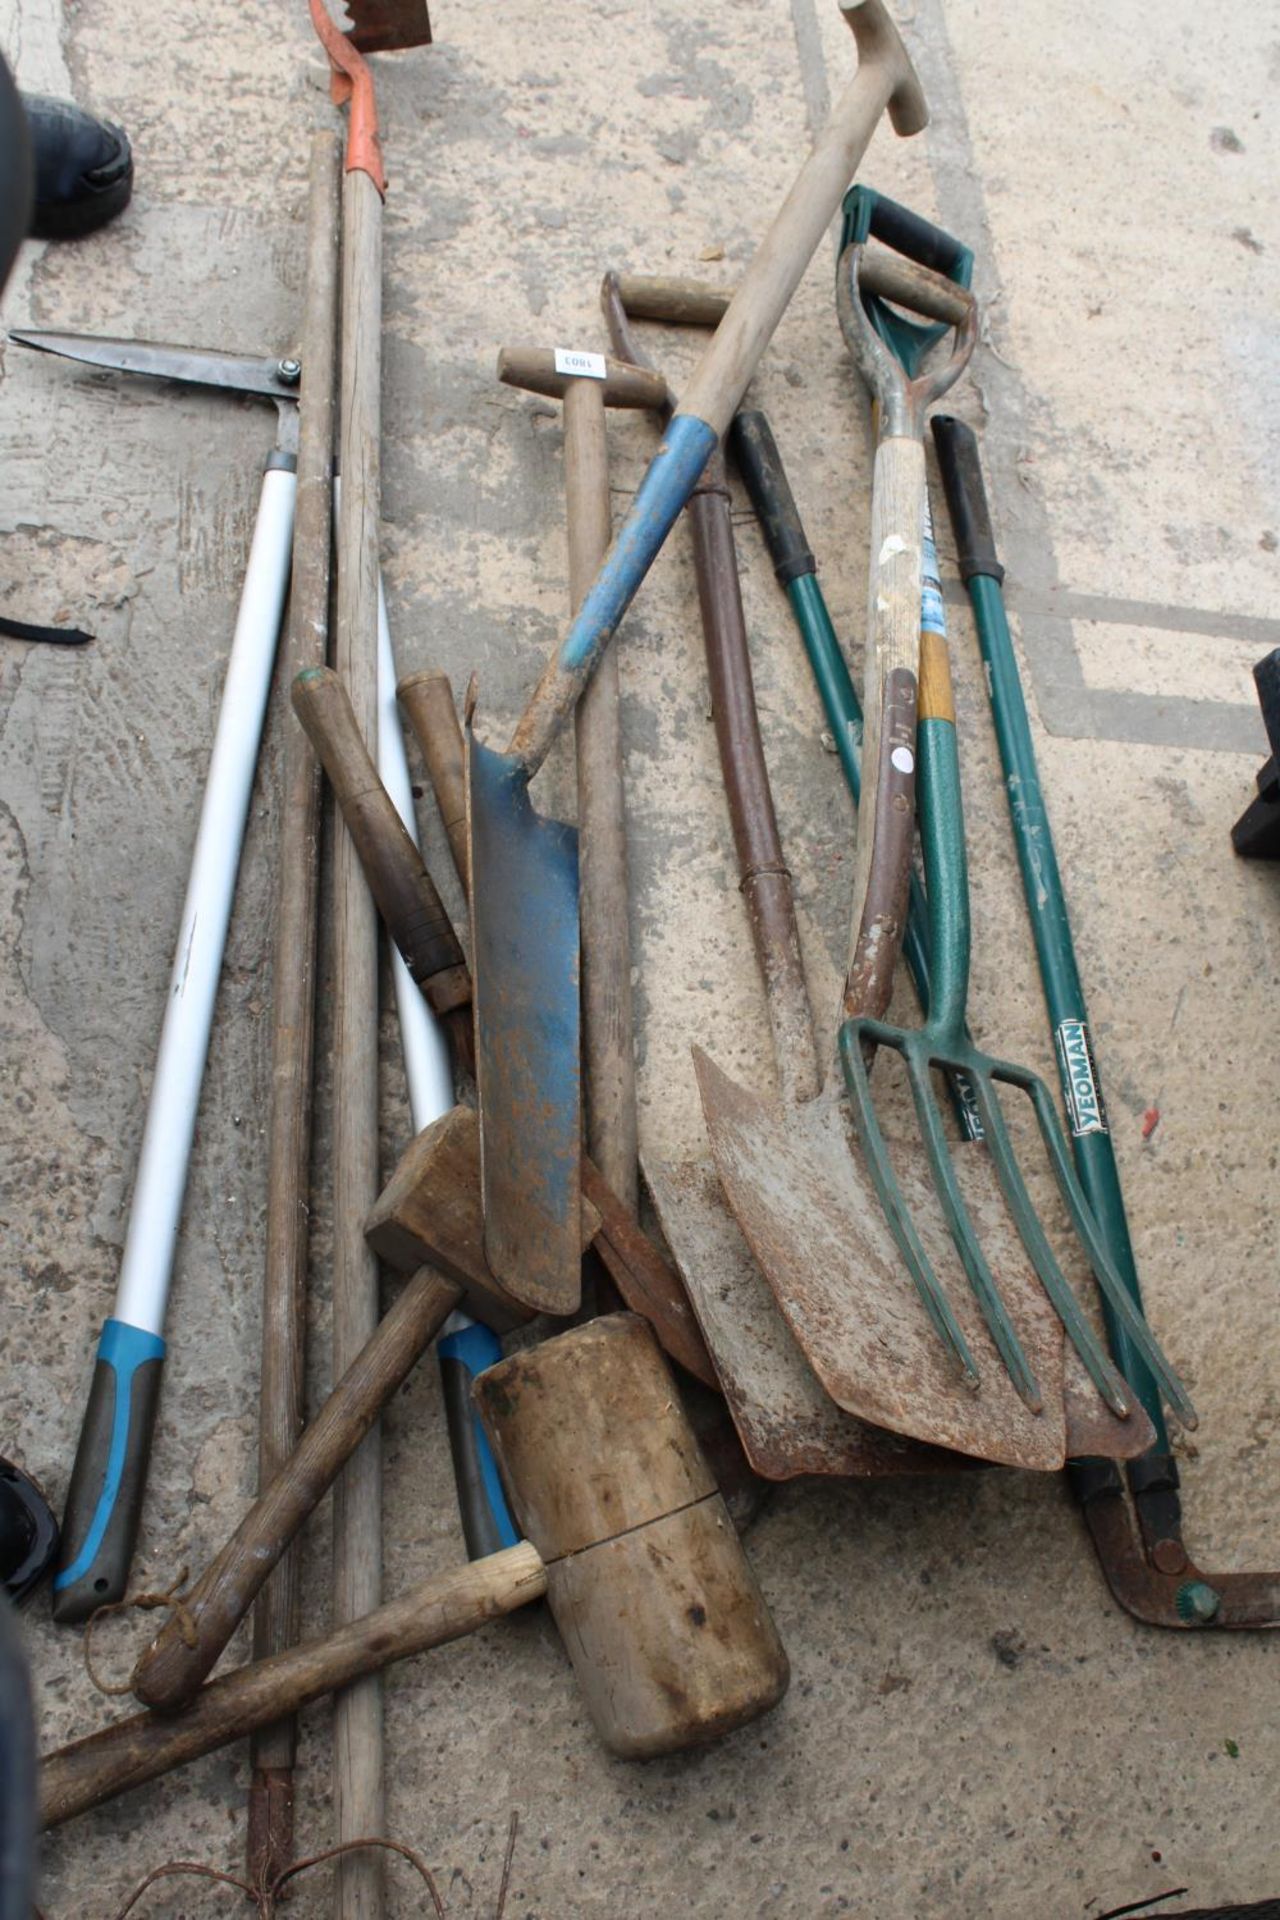 AN ASSORTMENT OF VARIOUS GARDEN TOOLS TO INCLUDE A FORK, A SHOVEL AND A DITCHING SPADE ETC - Image 2 of 2